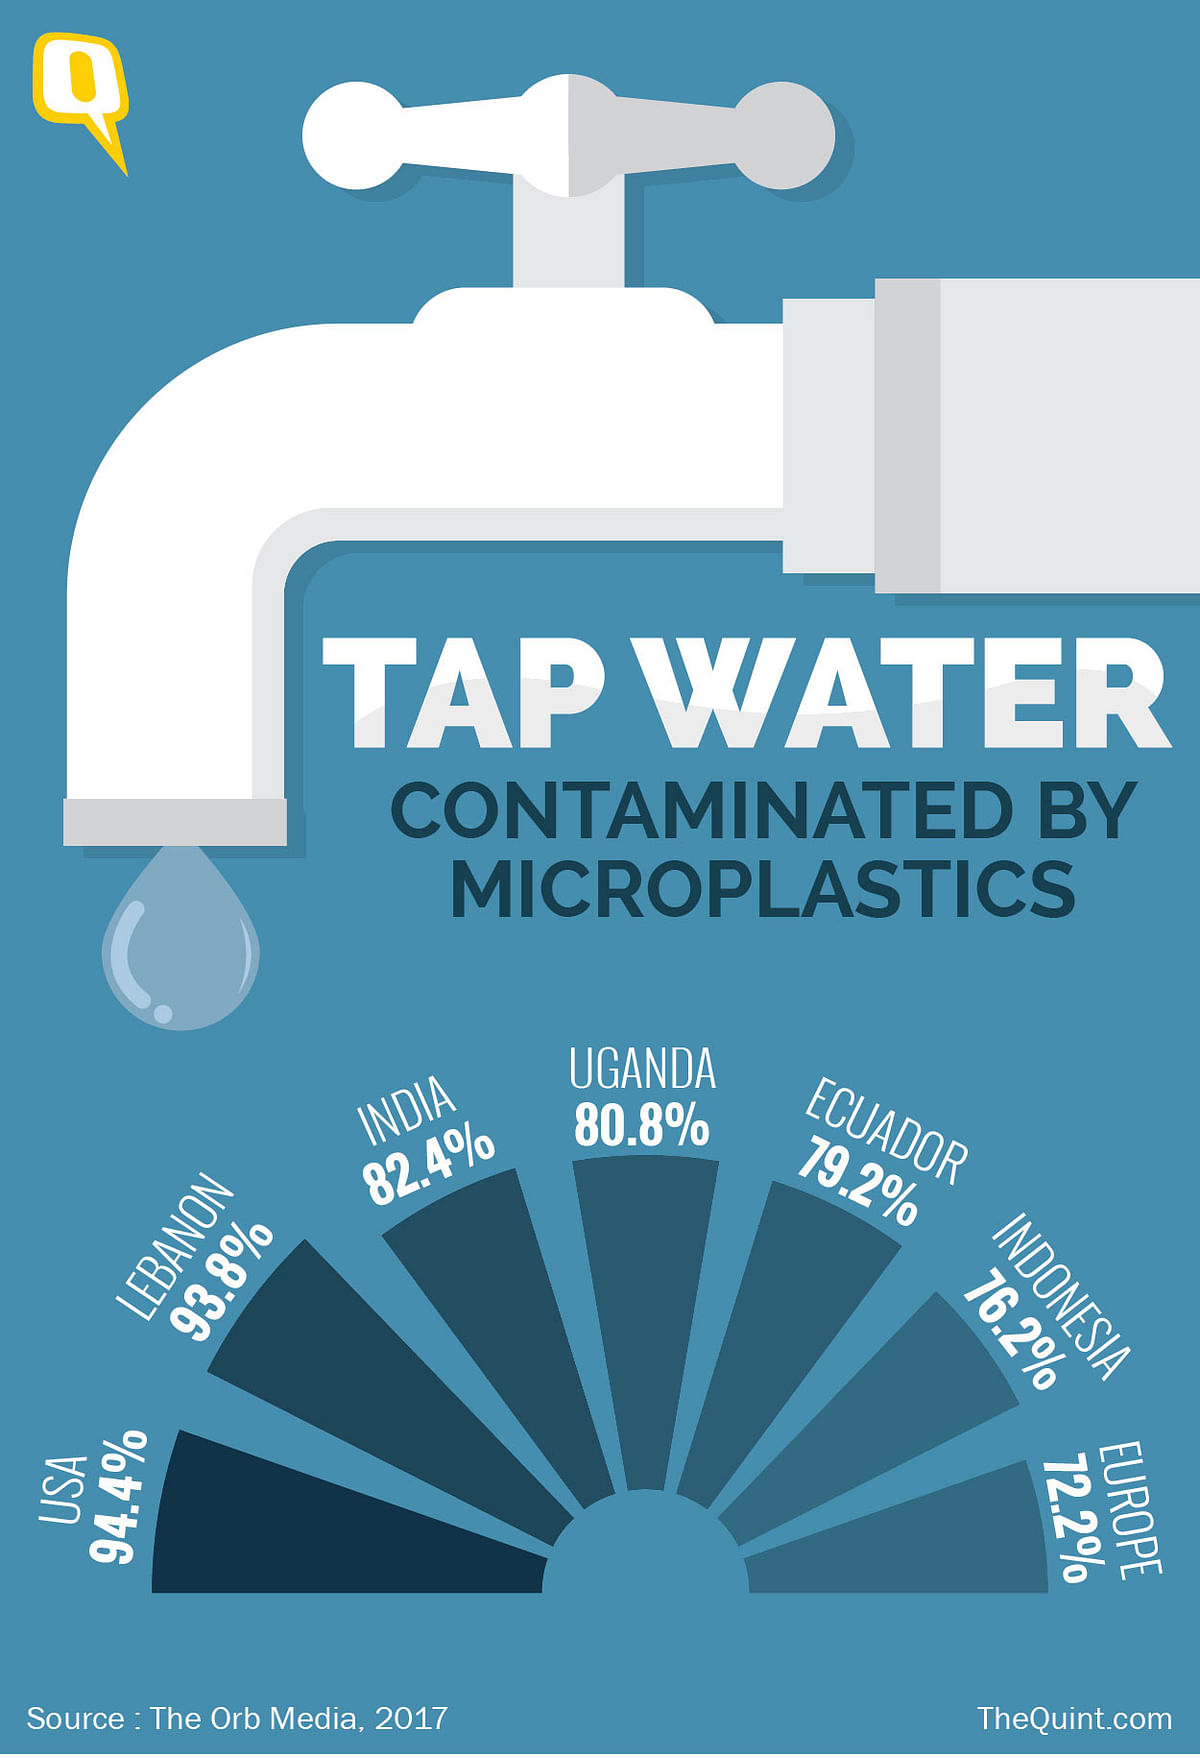 Out of the 17 tap water samples collected from New Delhi, 14 tested positive for microscopic plastic fibres. 